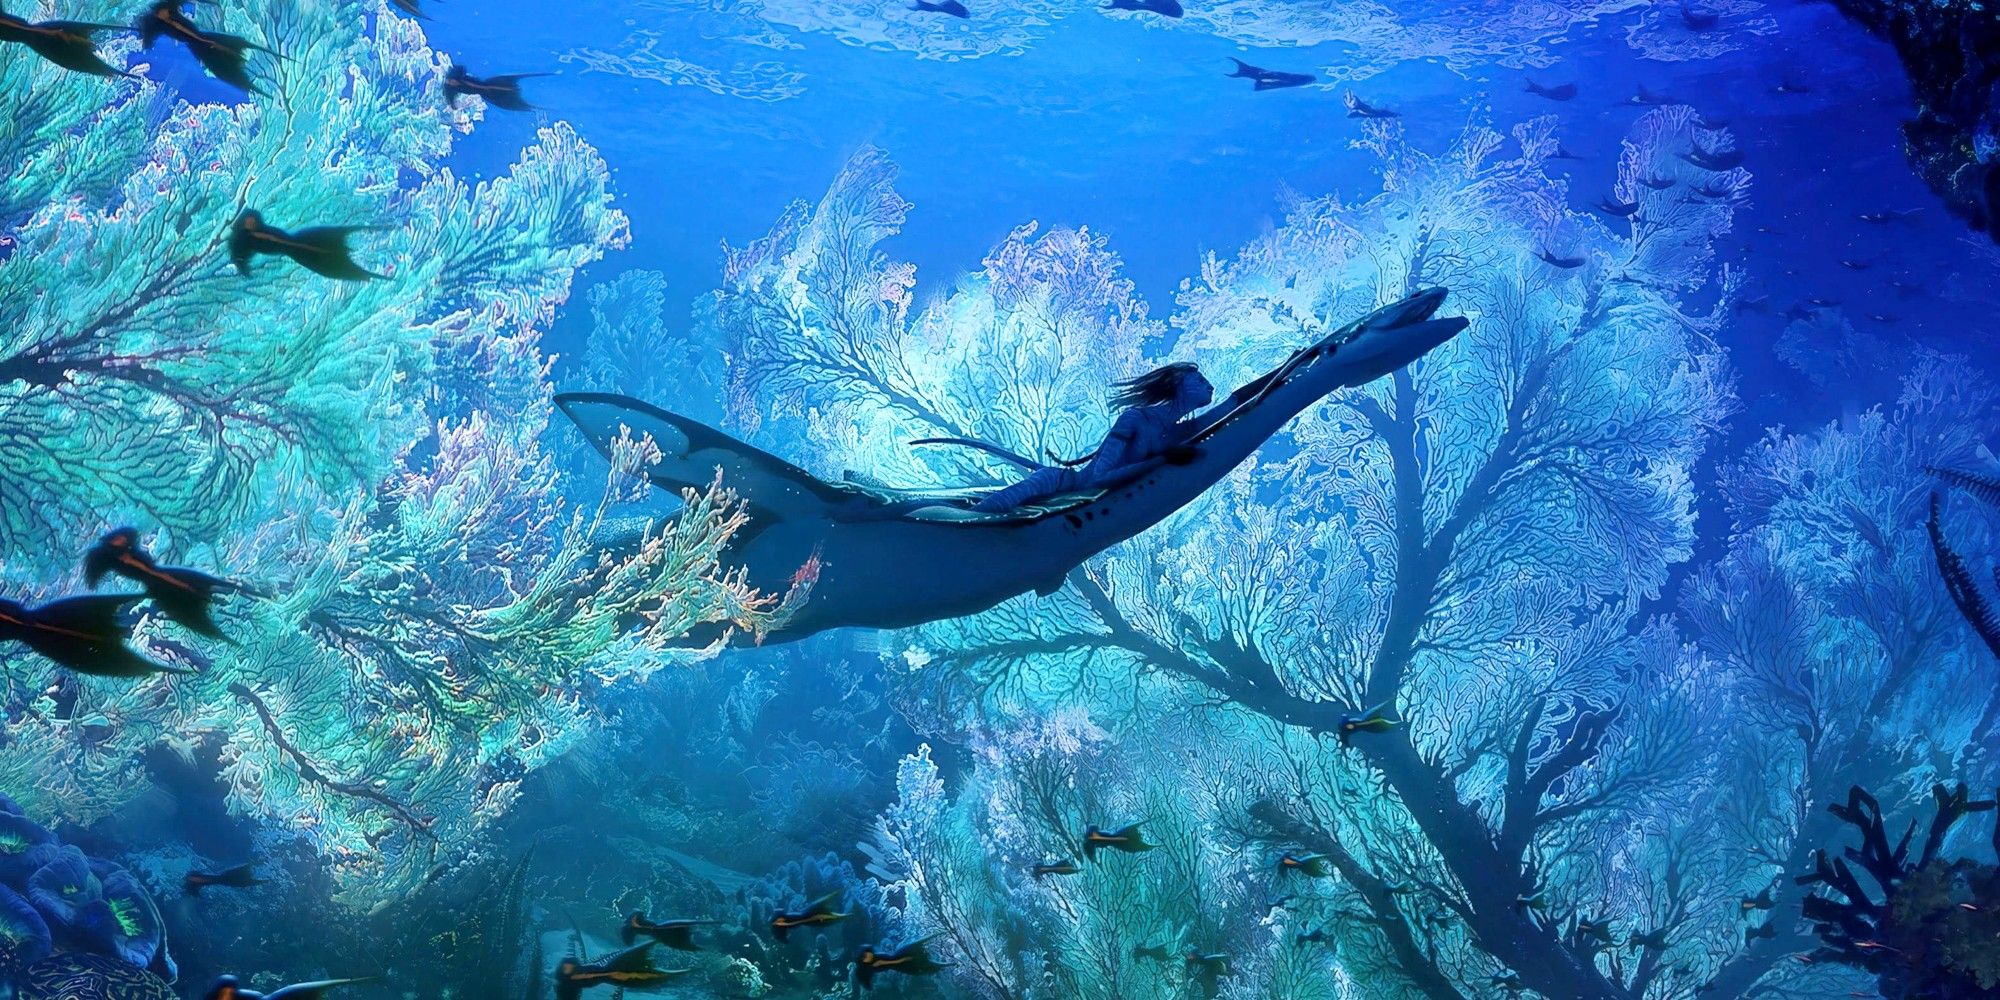 Navi riding an underwater creature through a coral reef in Avatar The Way of Water